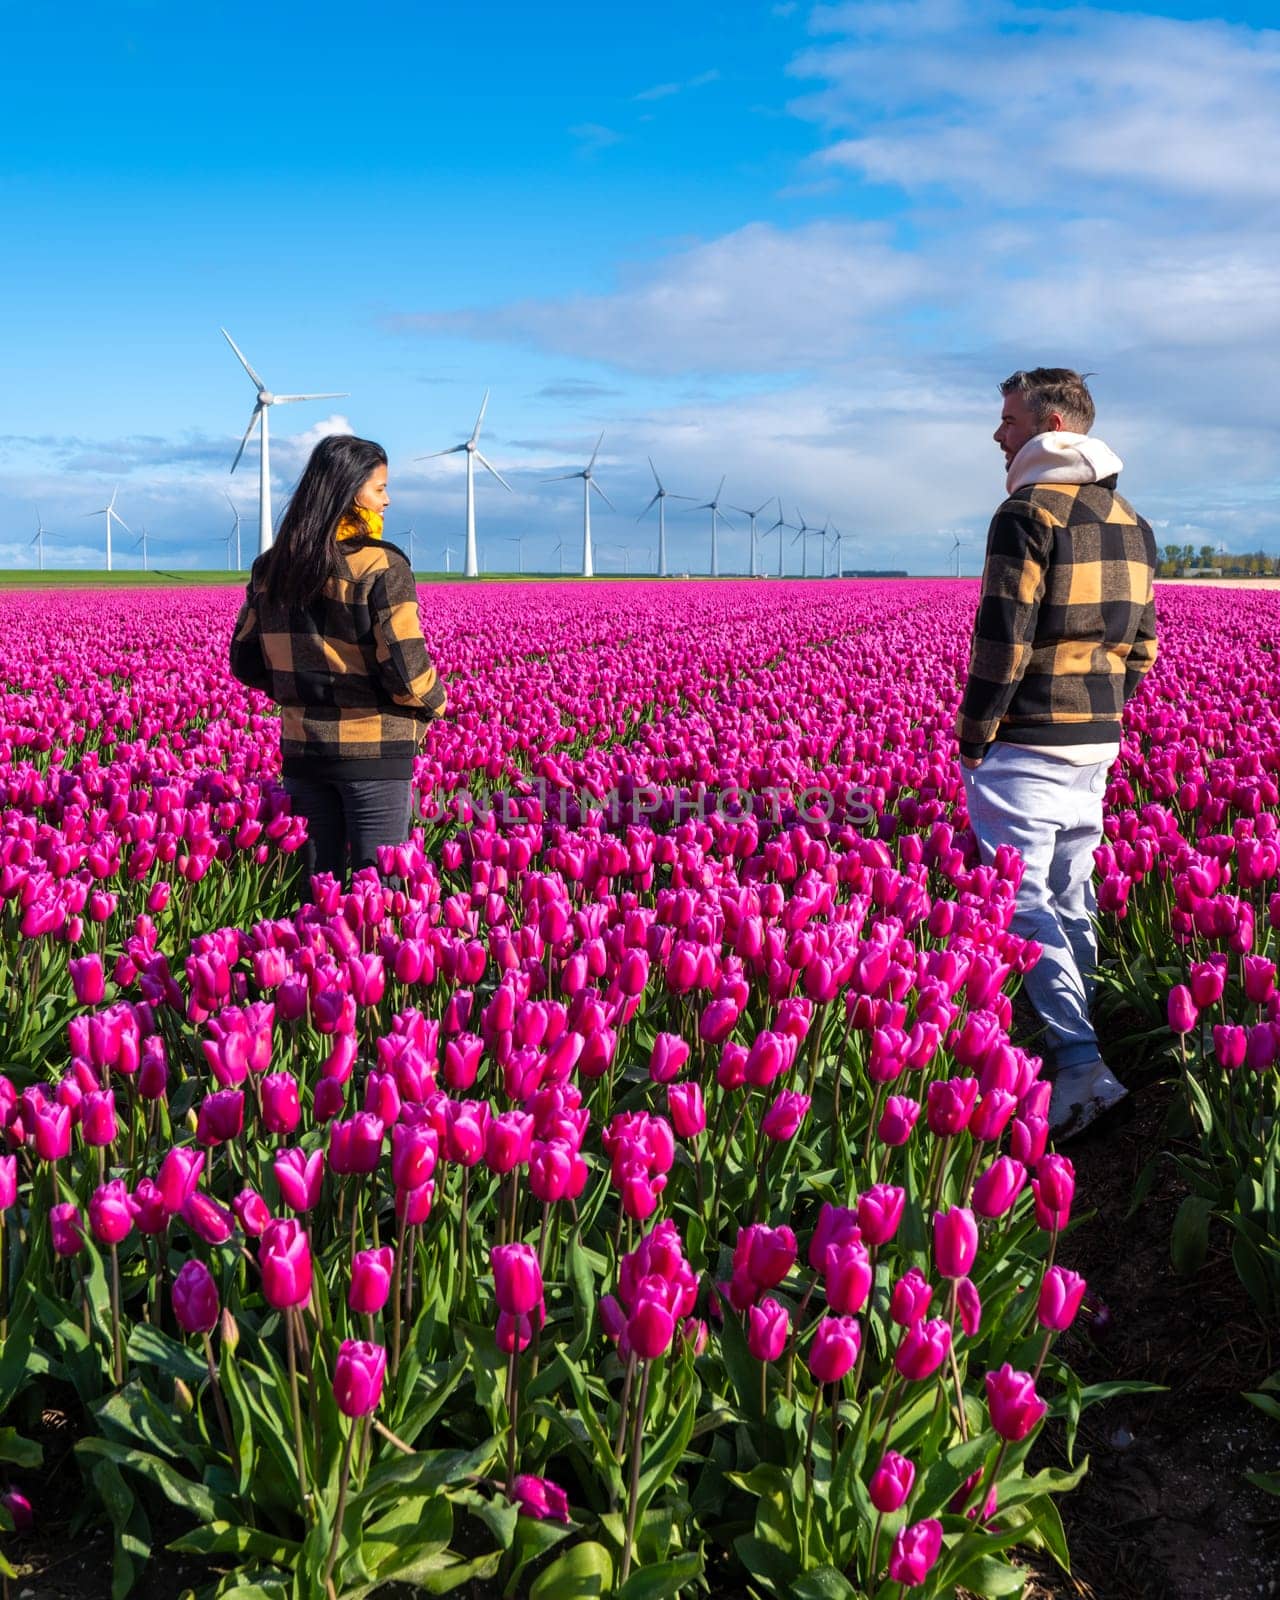 A man and a woman, surrounded by vibrant tulips, stand hand in hand in the sprawling Dutch fields during springtime by fokkebok